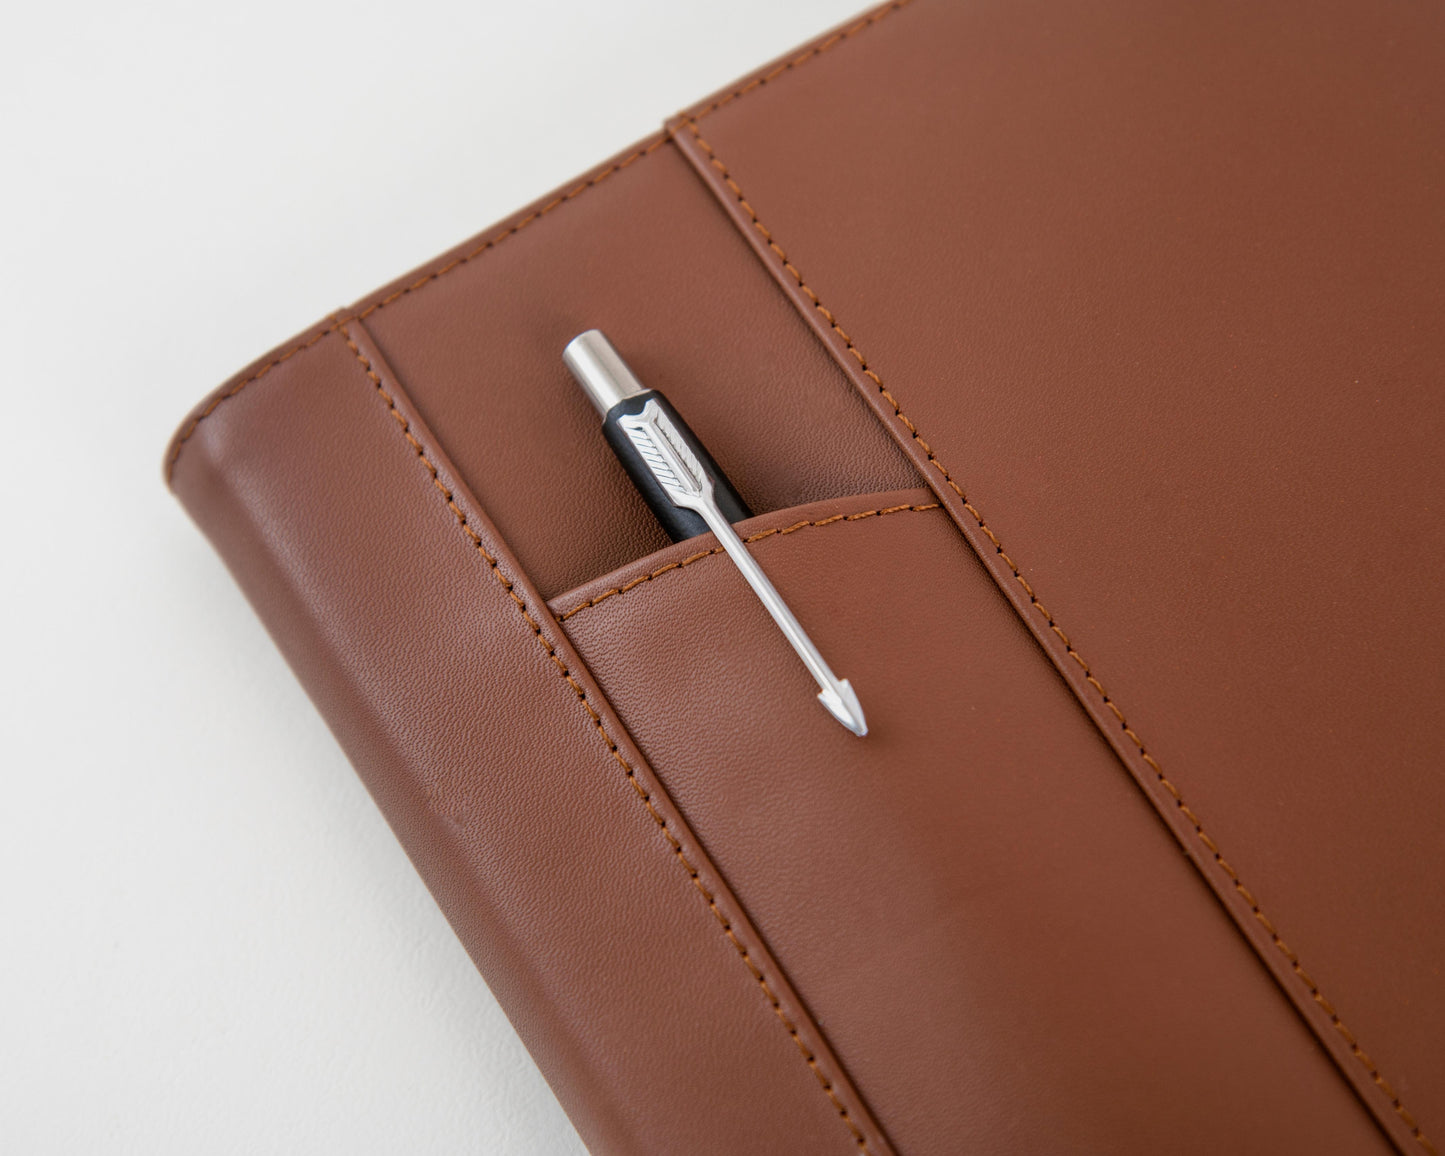 Enfold Leather Diary - Tan